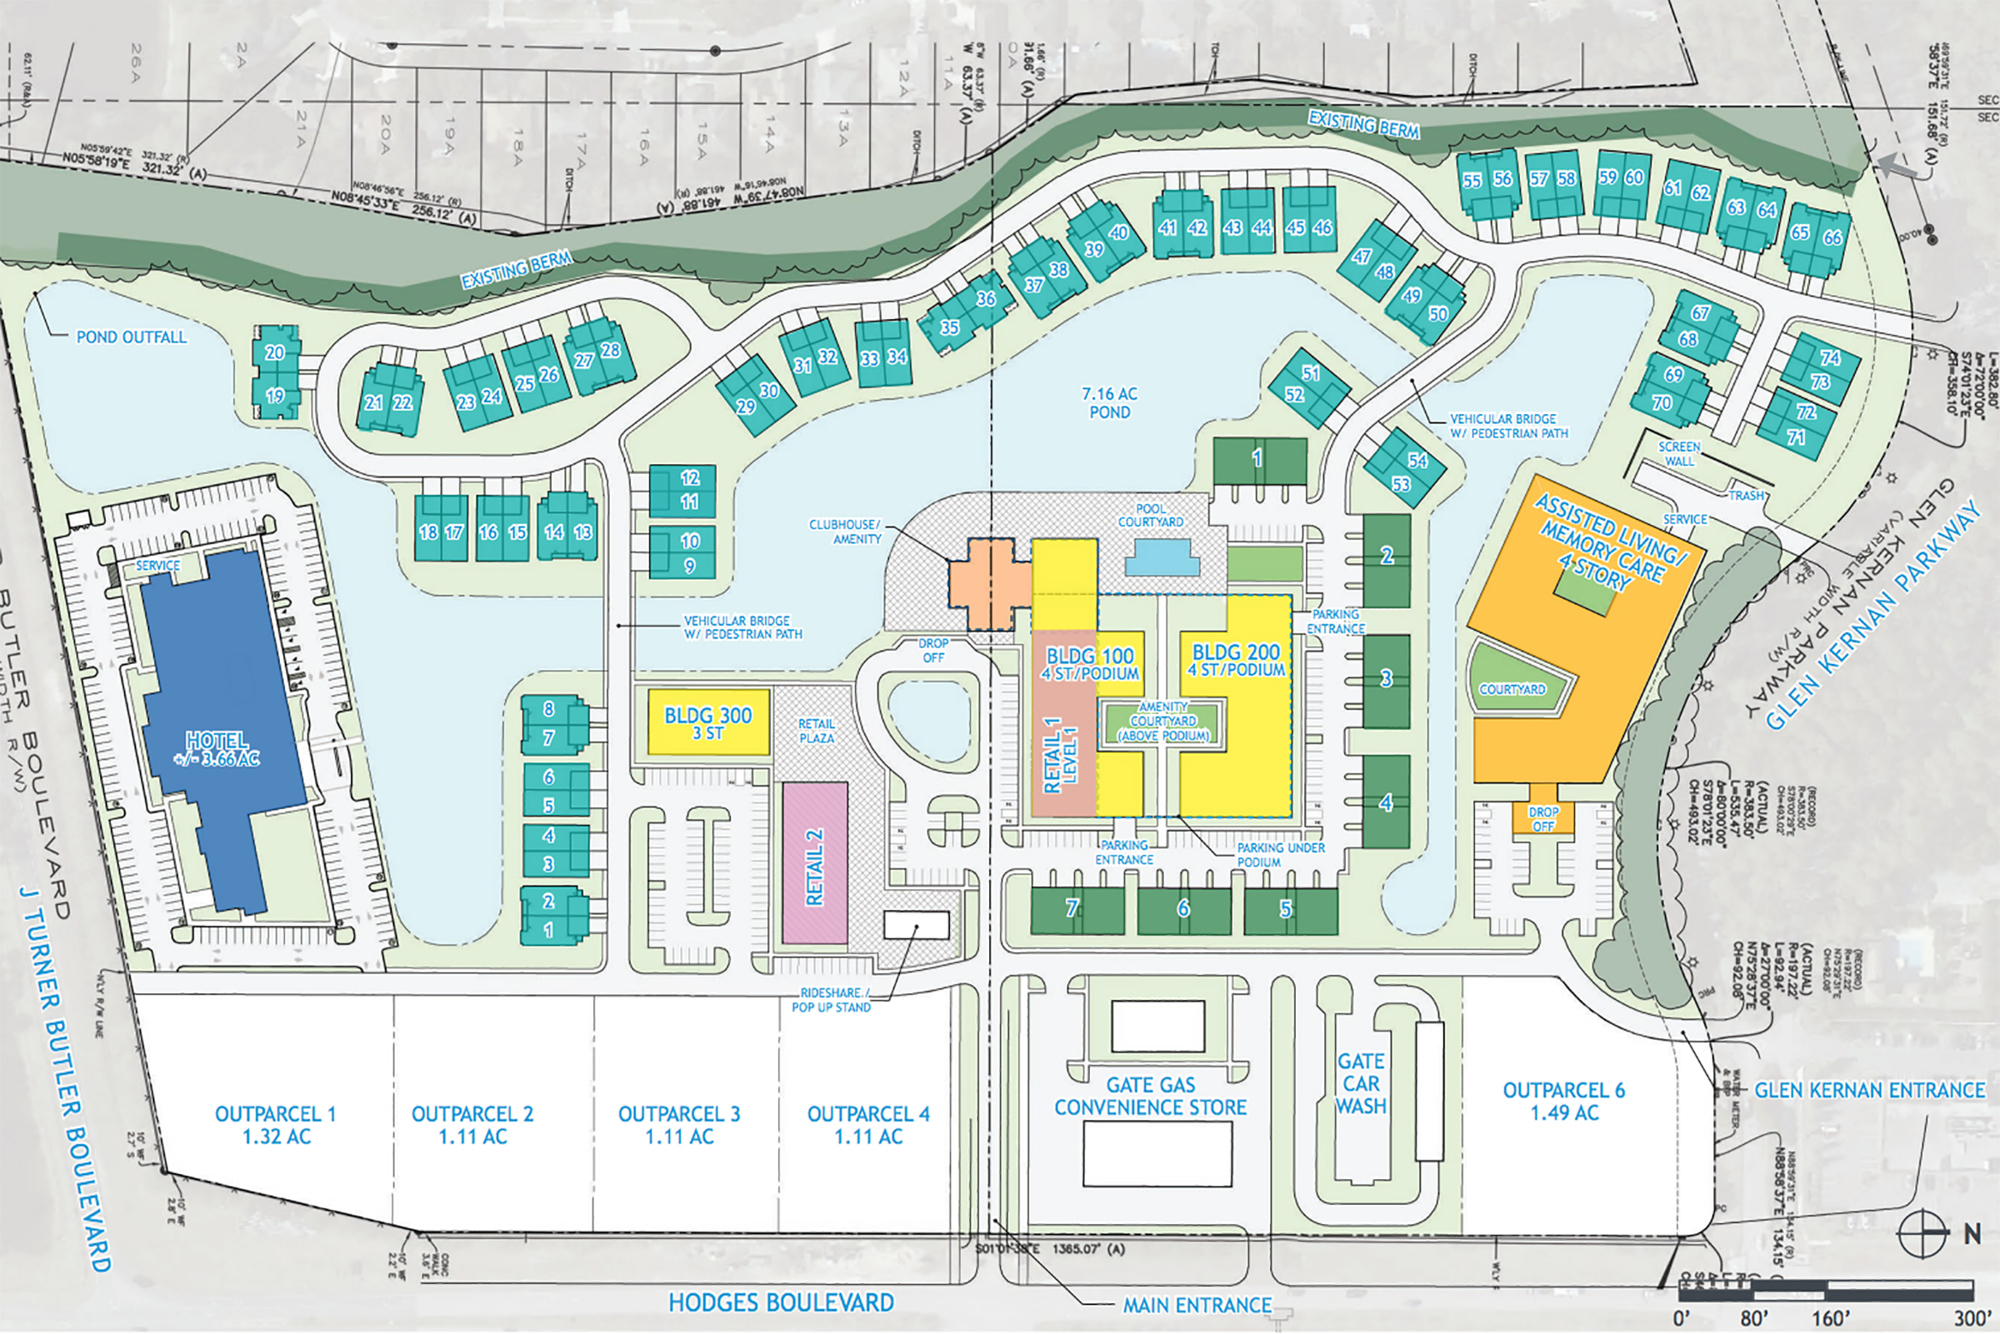 The site plan for Glen Kernan Park shows the hotel on the south side of the property, shown on the map in blue.